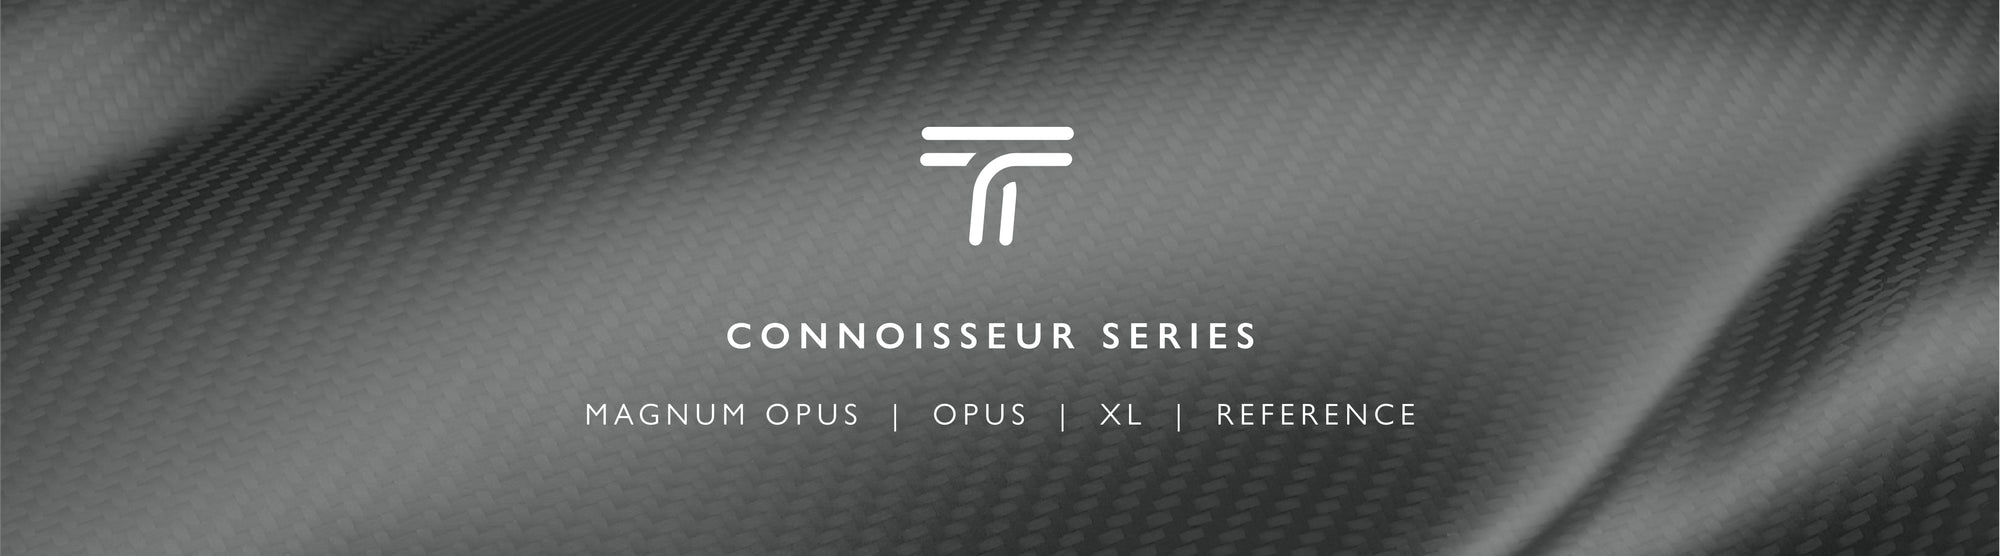 The logo for the concisous series.